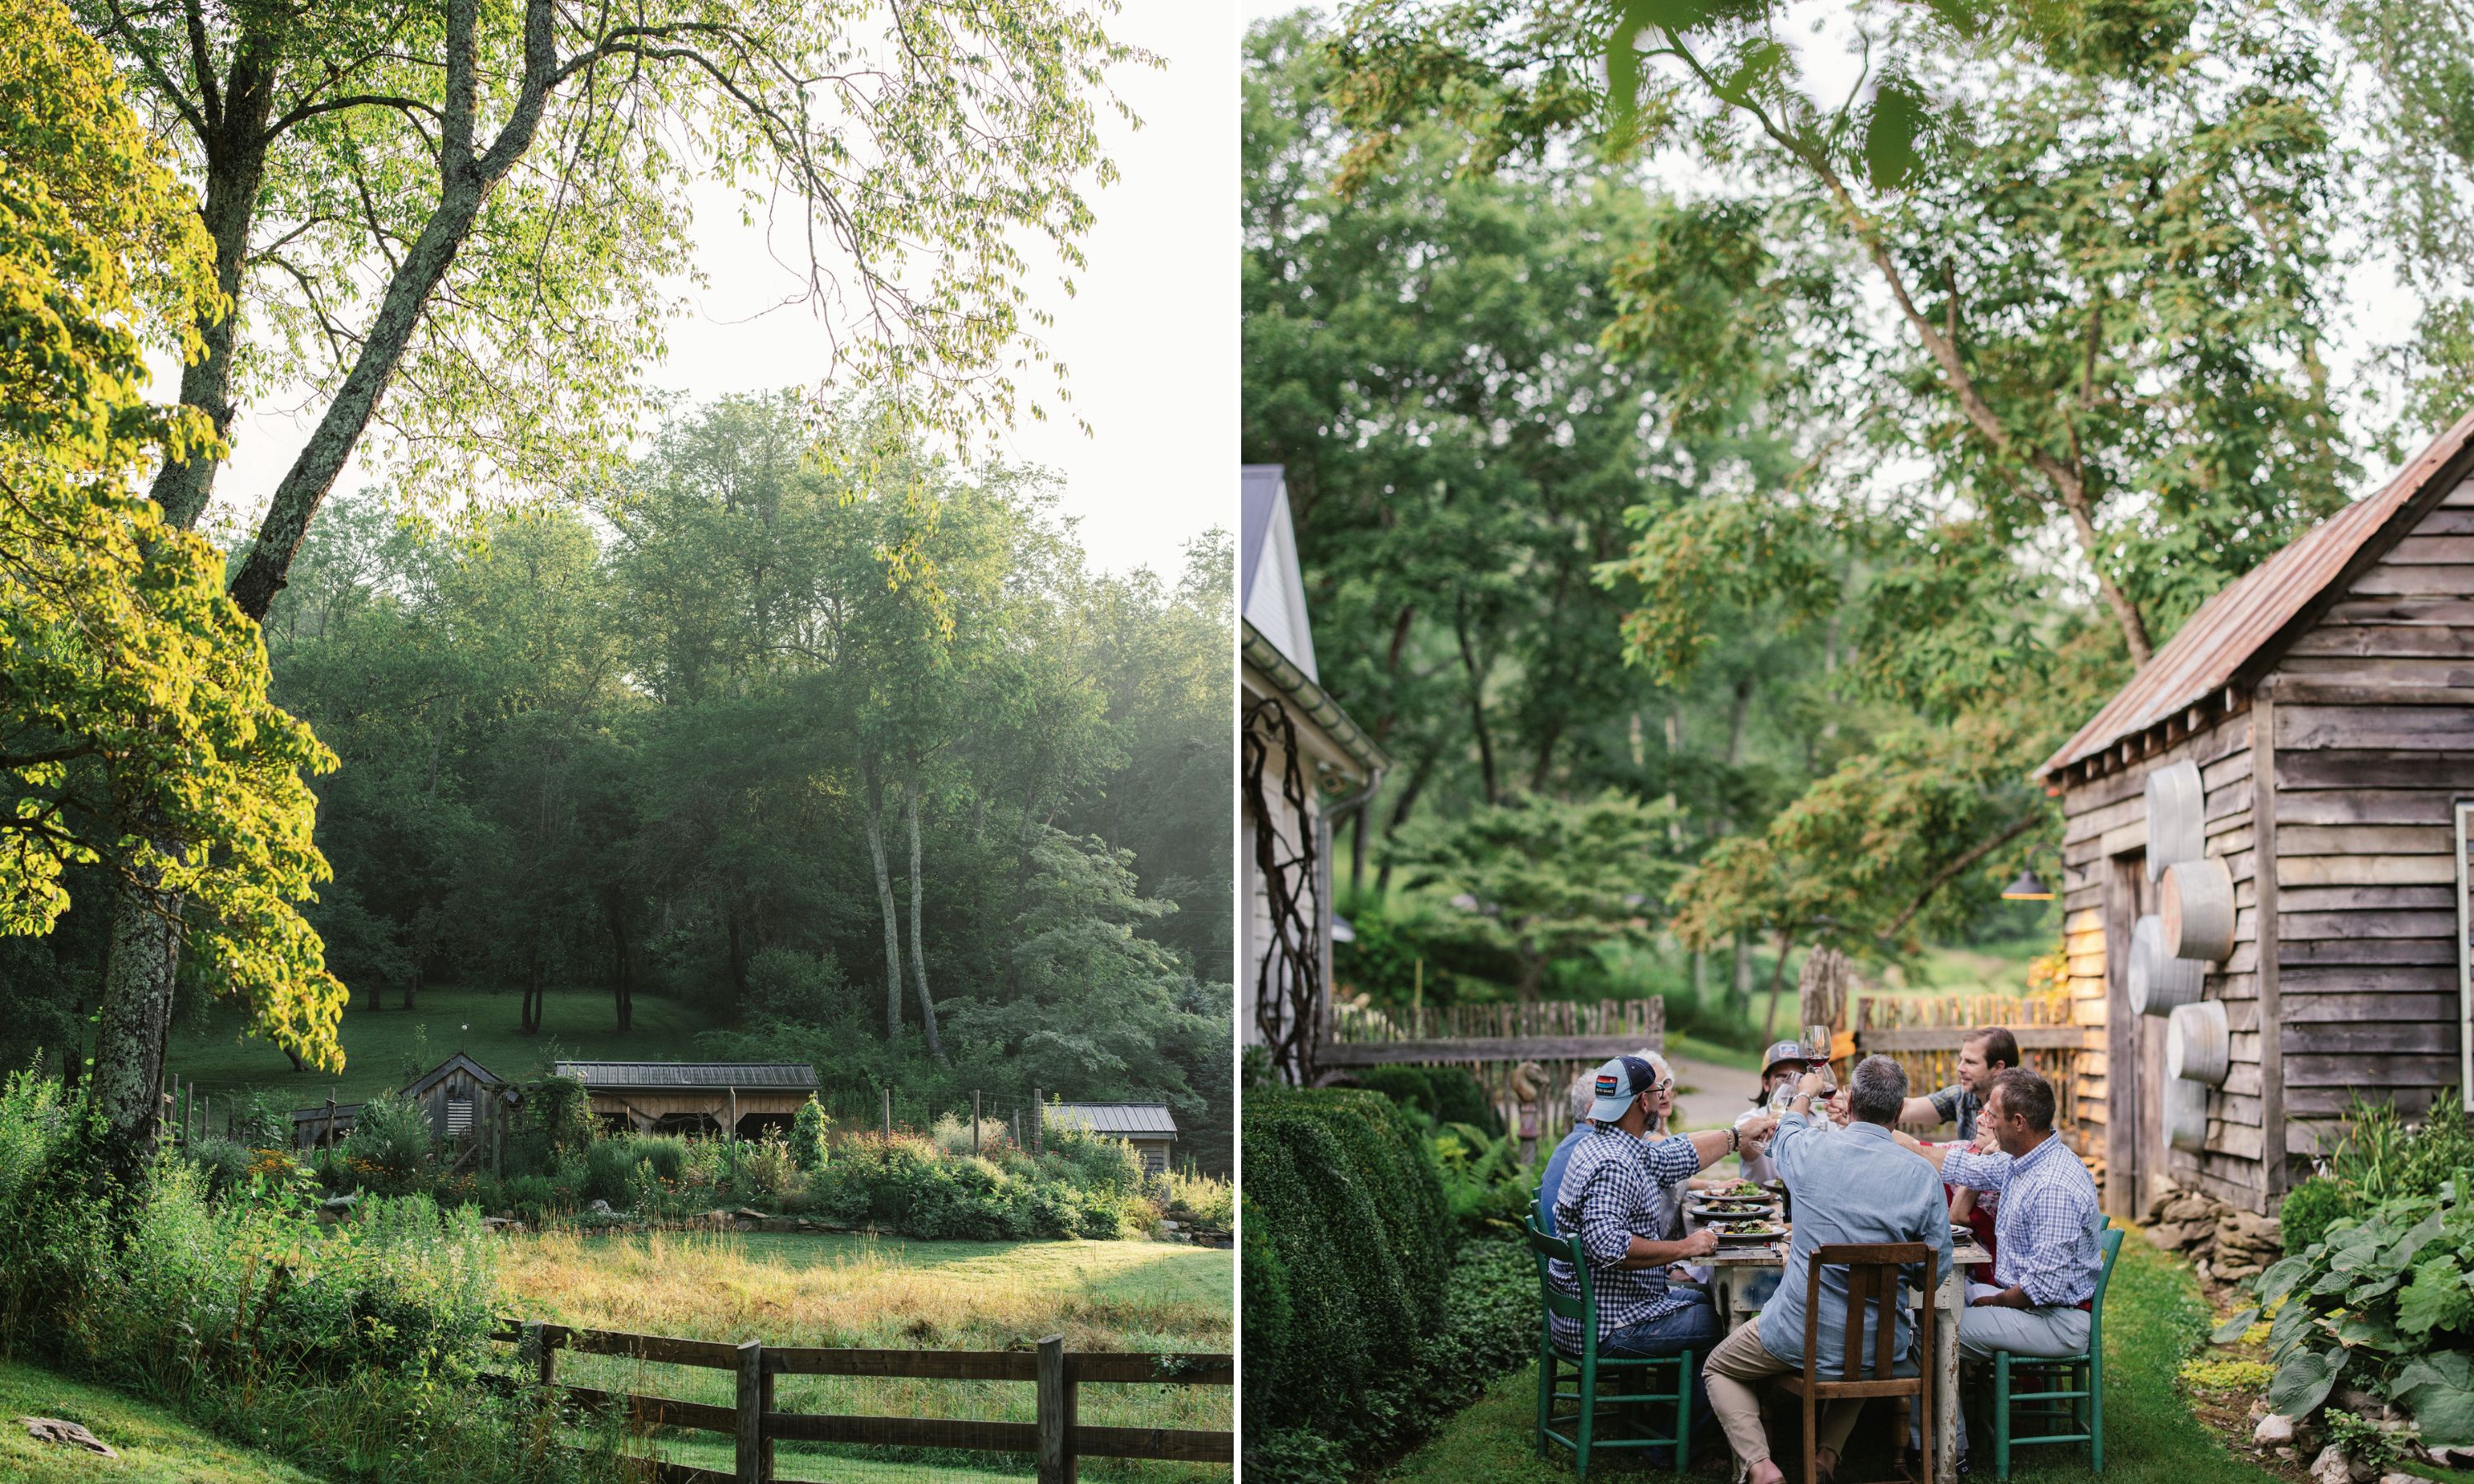 A collage of two images: an orchard, potting shed, and chicken coop at a lush green farm with tall trees, a wood fence, and garden; A group of people sit outside in a lush garden, seated at a table. They cheers with wine glasses.